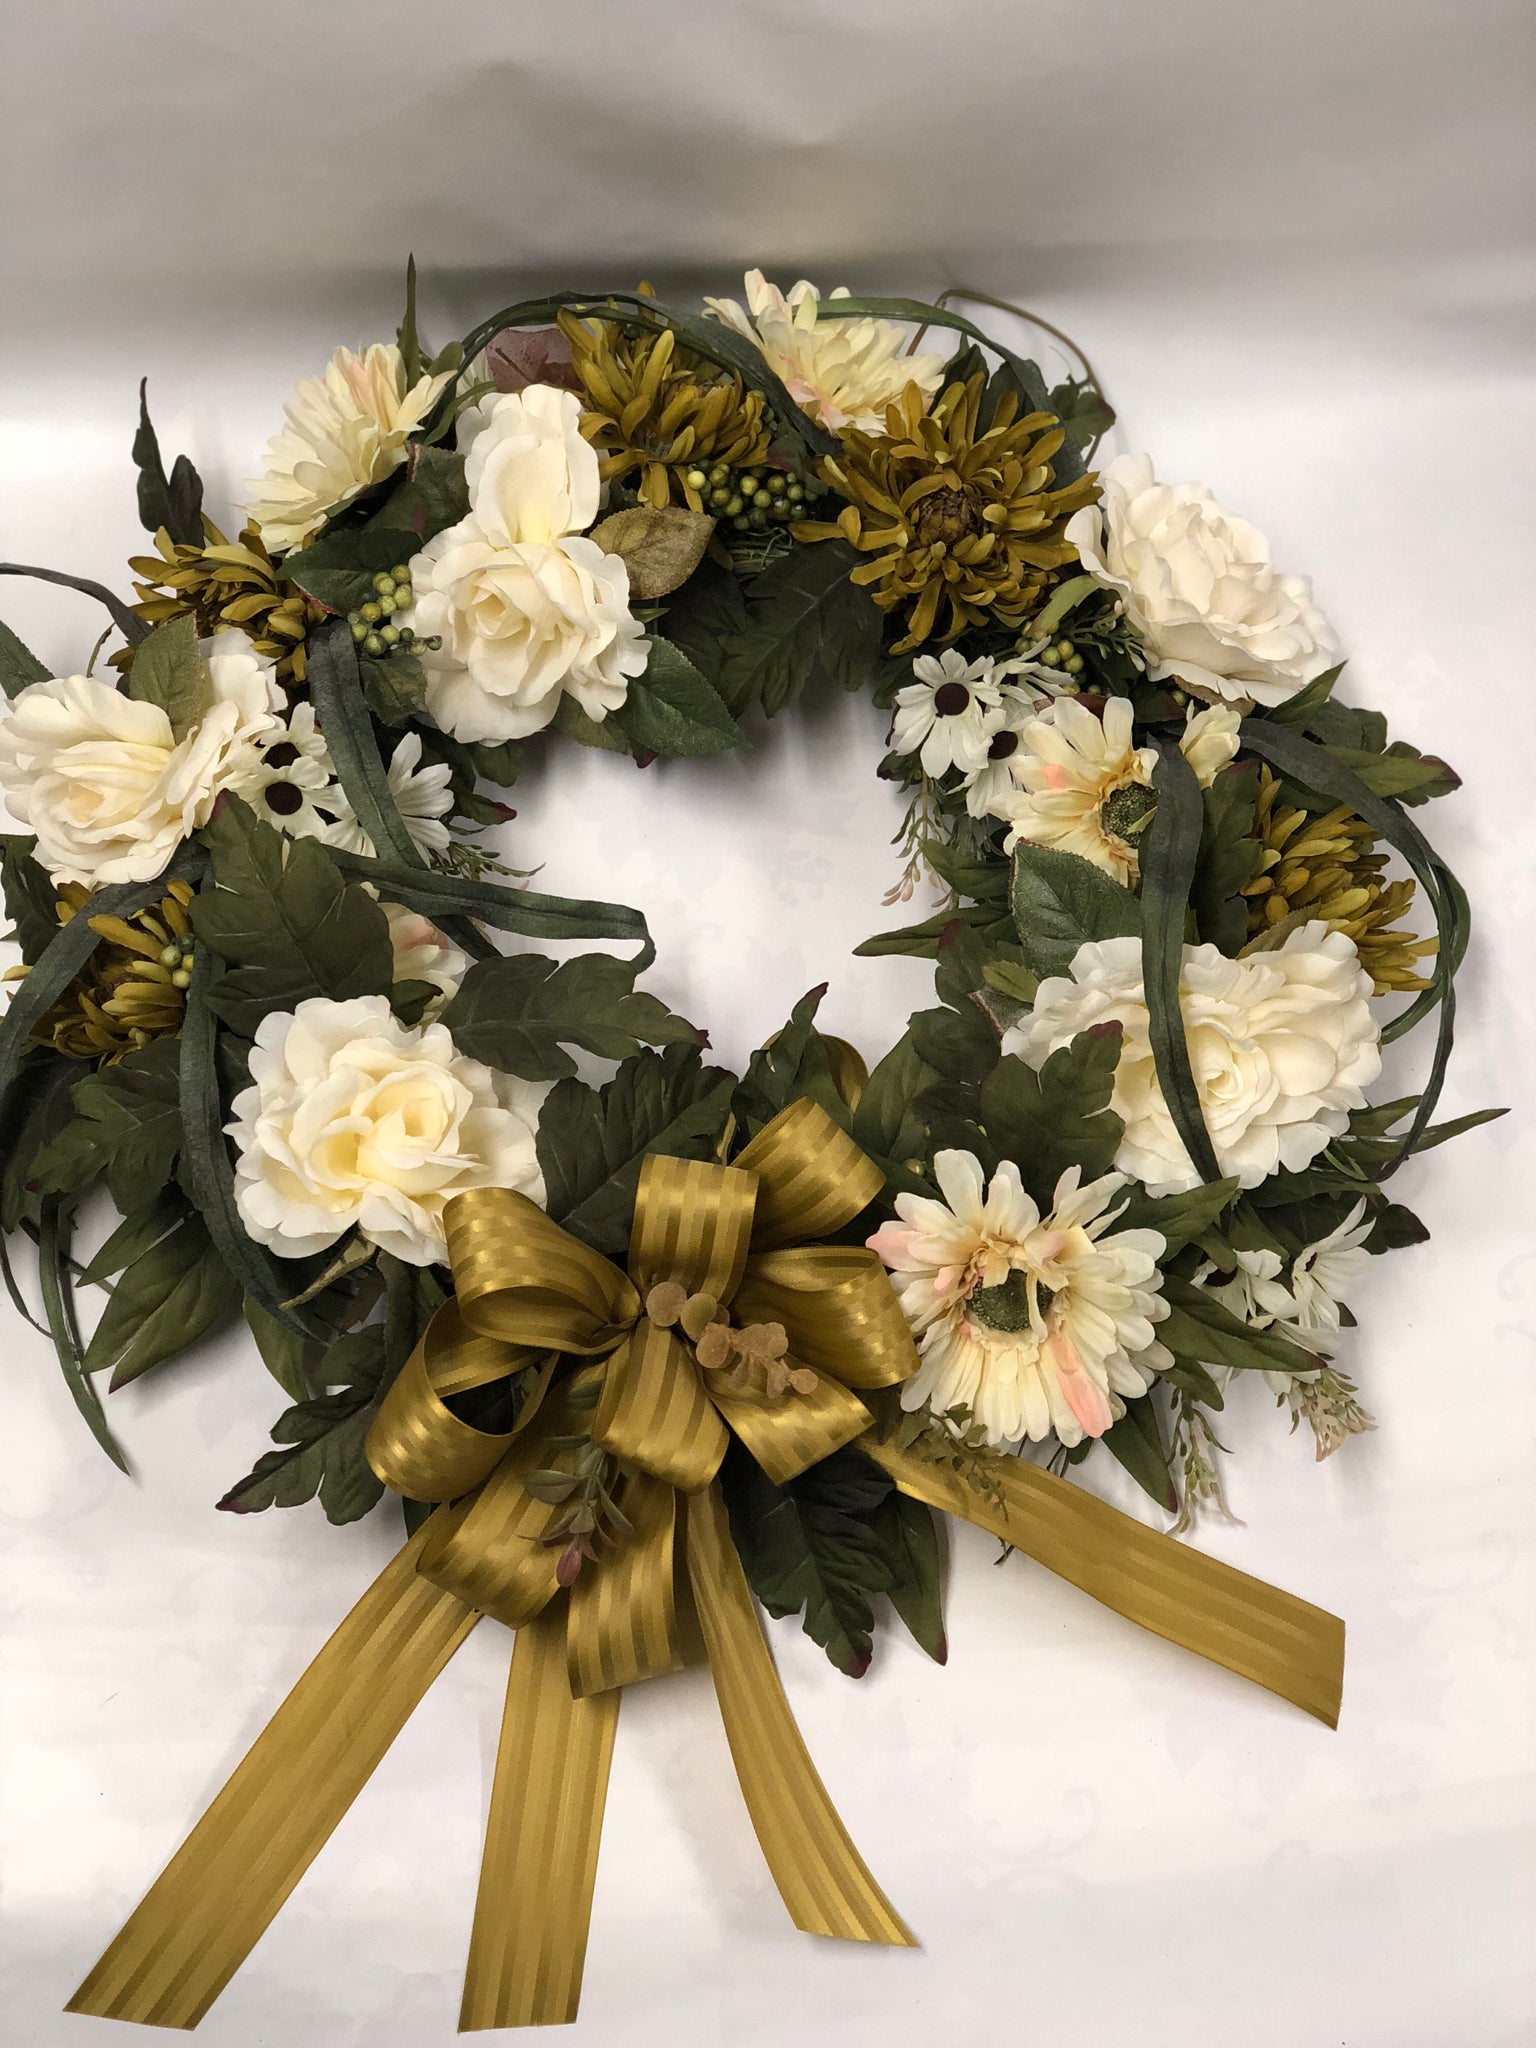 Cream and Olive Green Floral Wreath